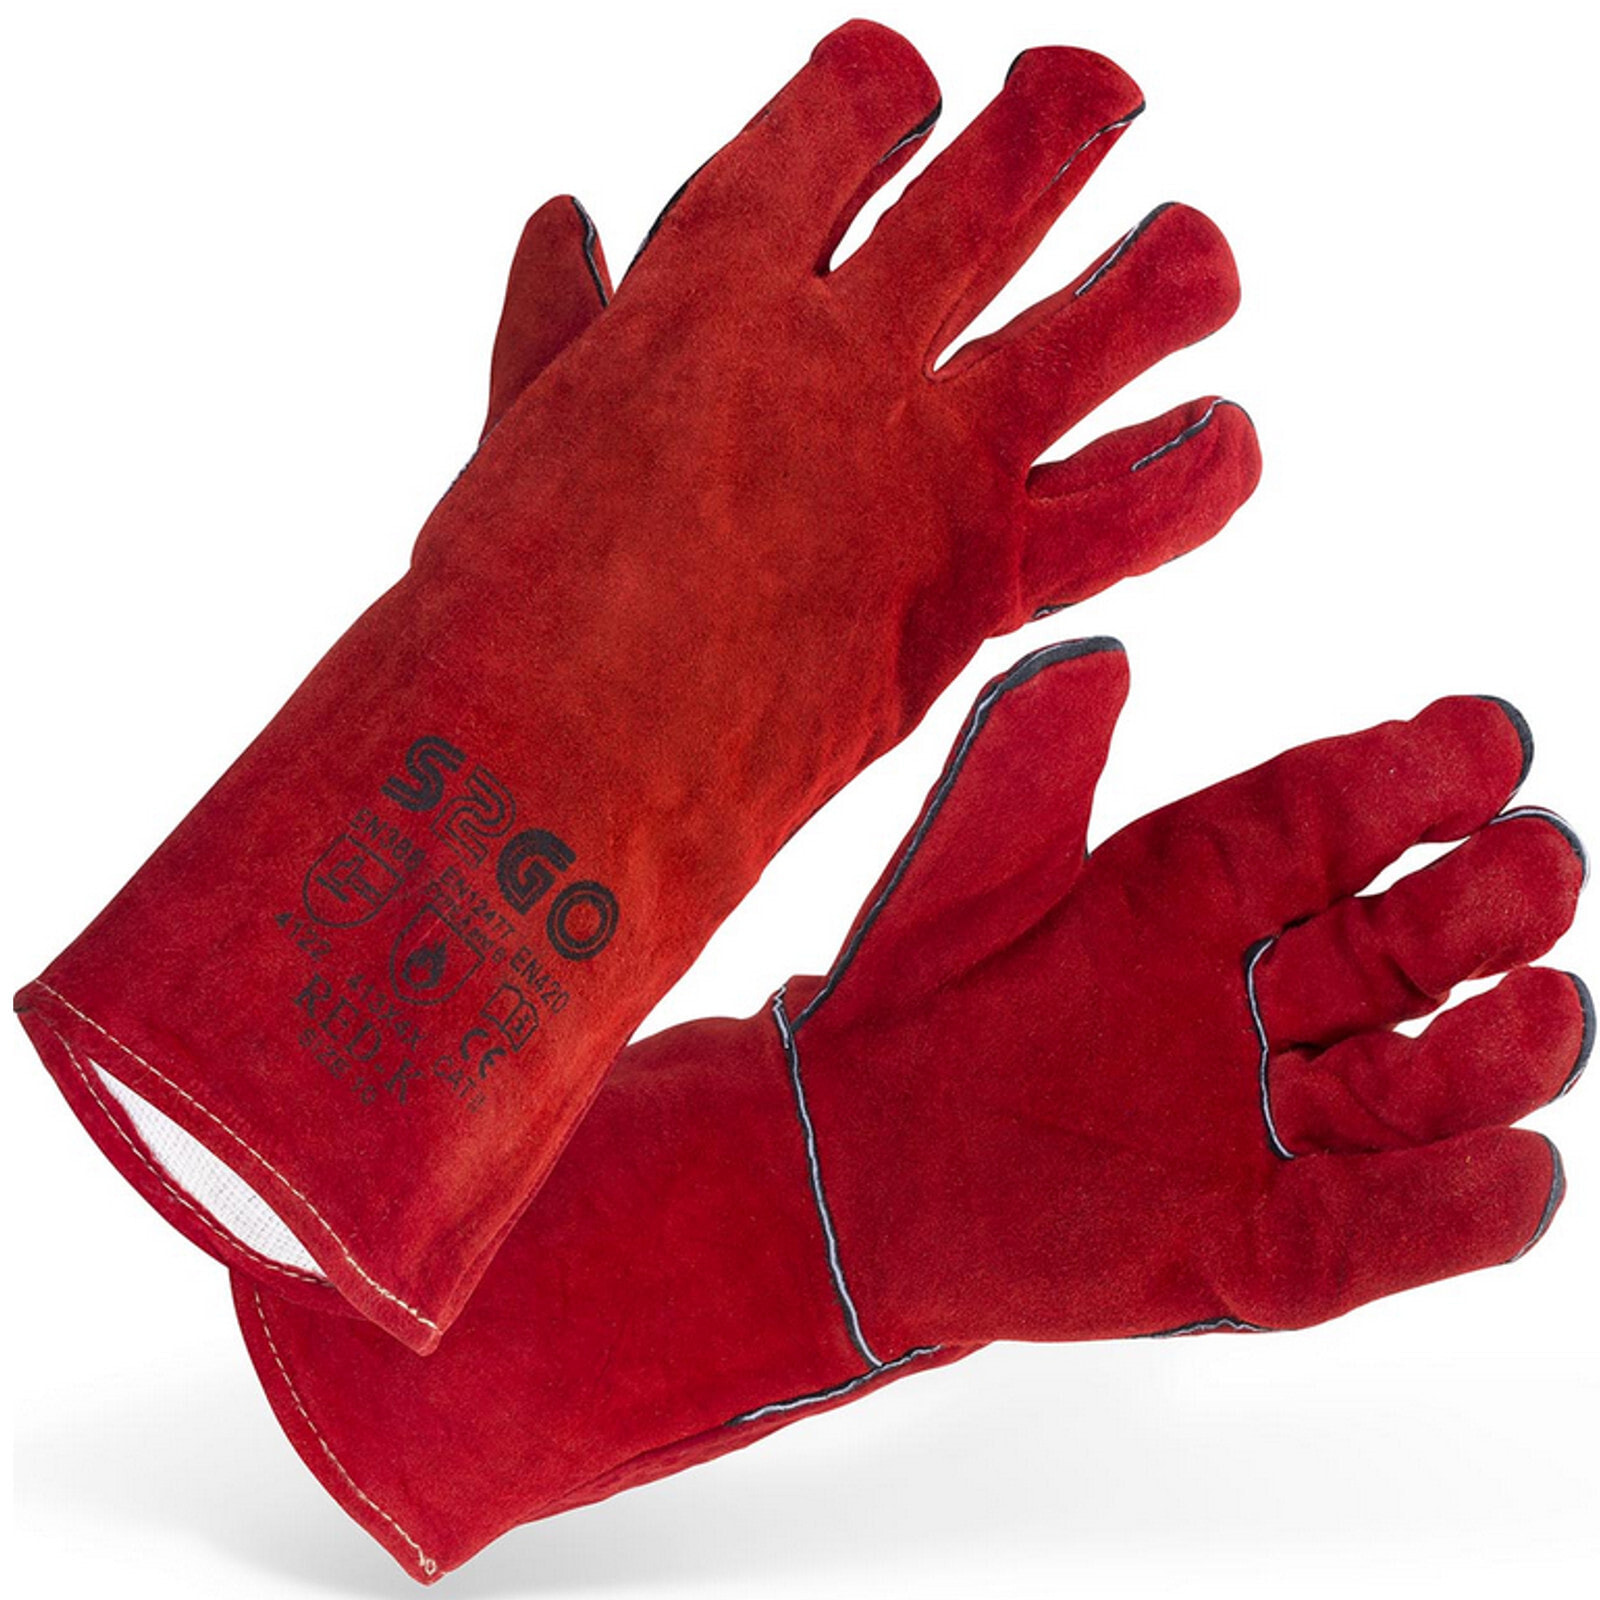 Welding protective work gloves made of cowhide red